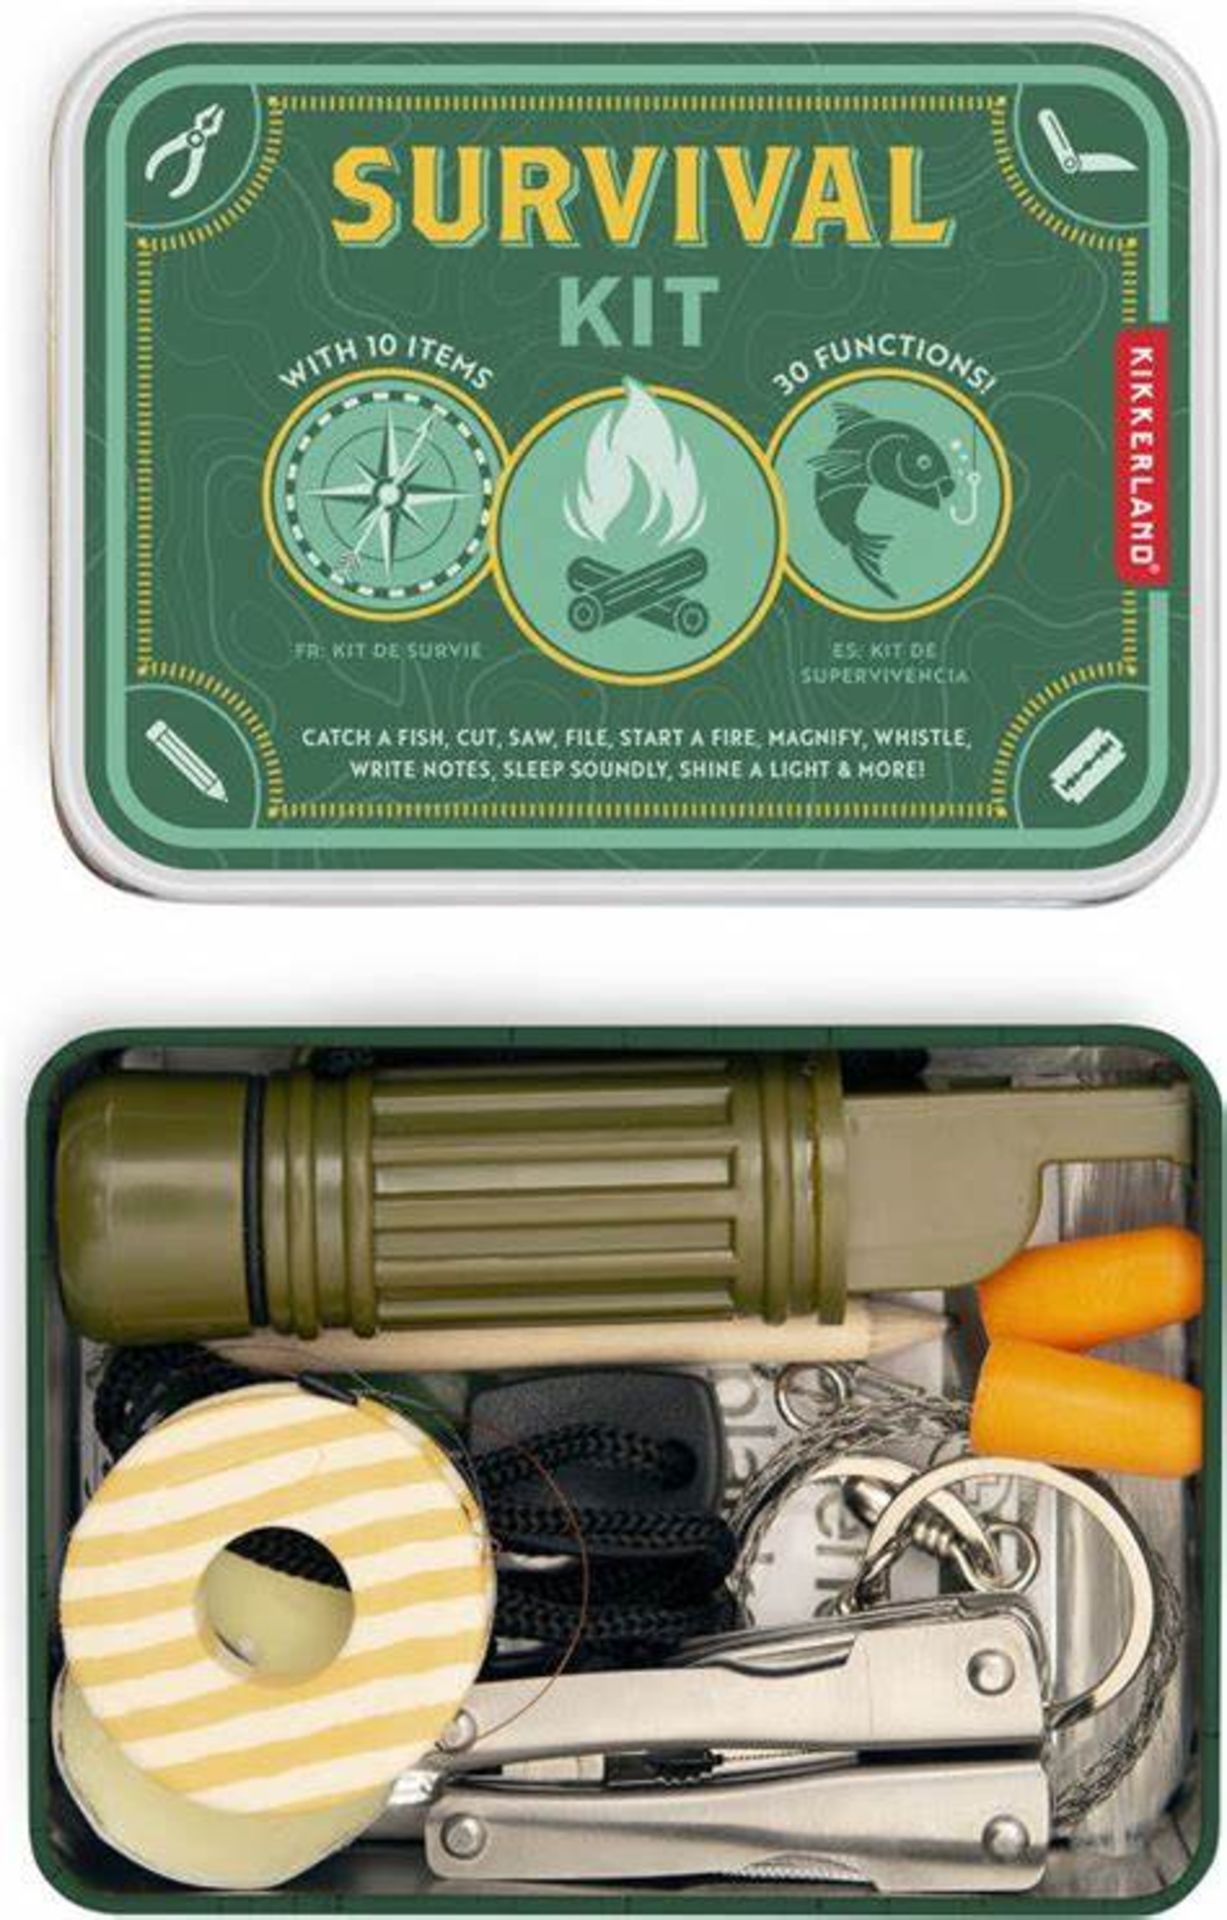 2 x Kikkerland Survival Kits - Each Kit 10 Items With 30 Survival Functions - New Stock - RRP £70 - Image 5 of 5